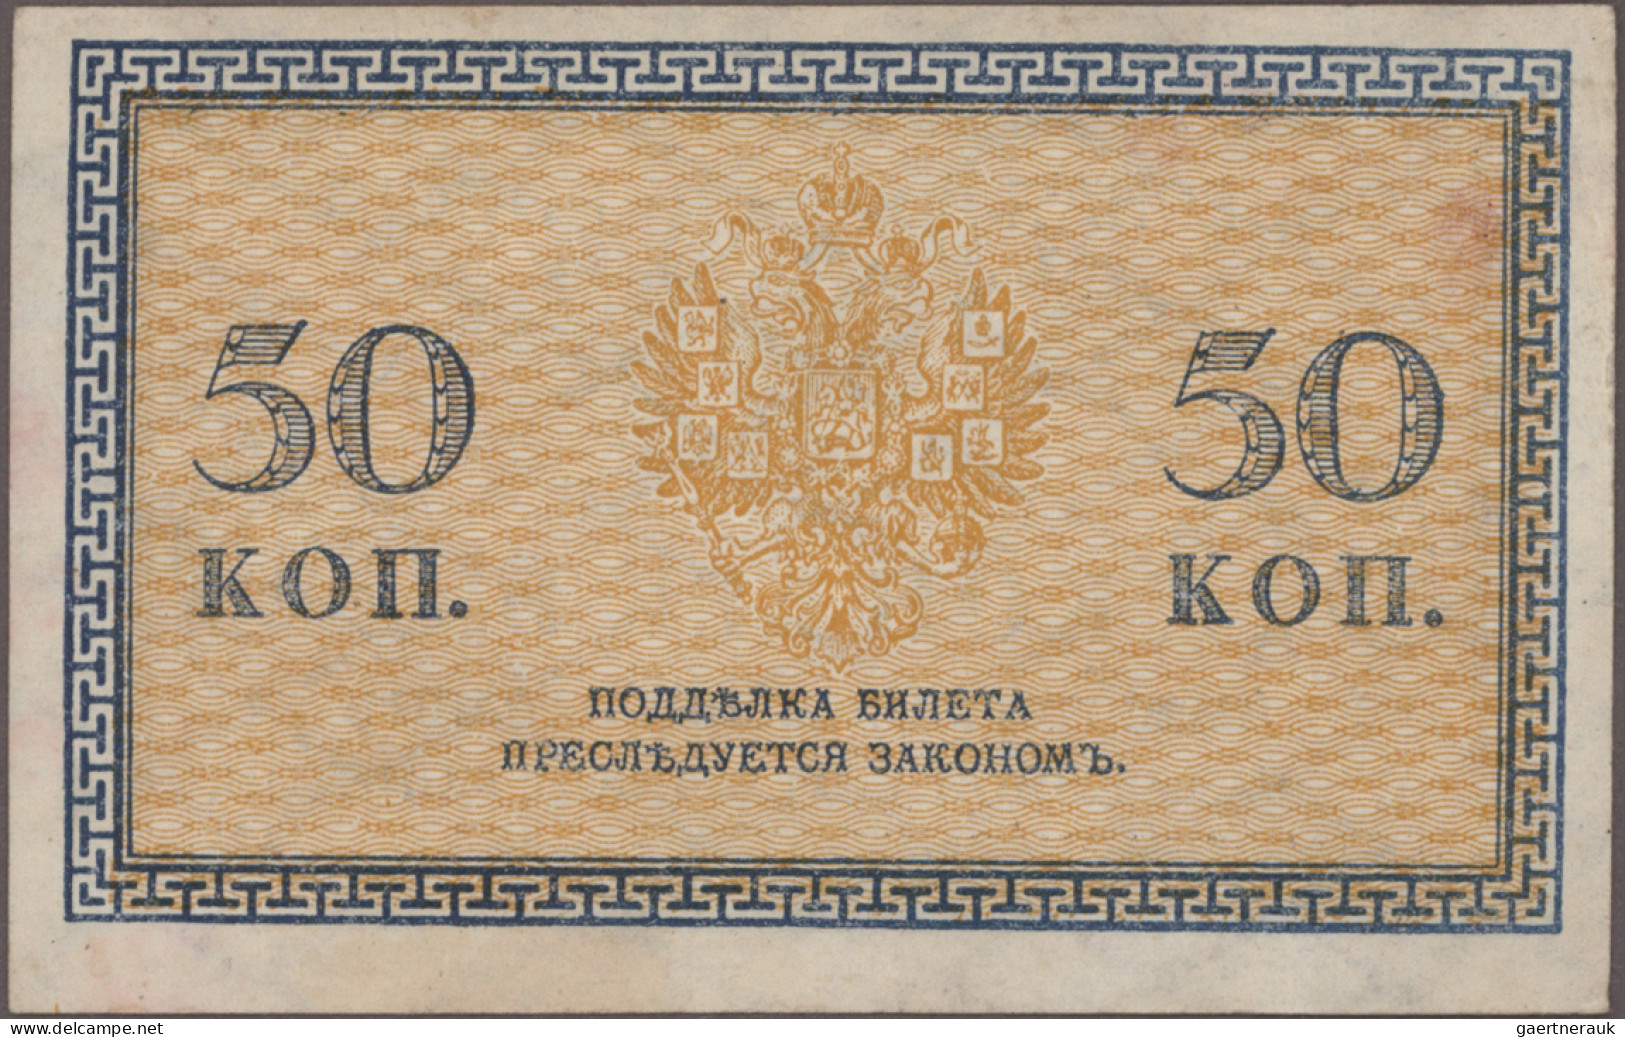 Russia - Bank Notes: North-Russia, set with 8 banknotes, series 1918-1919, compr